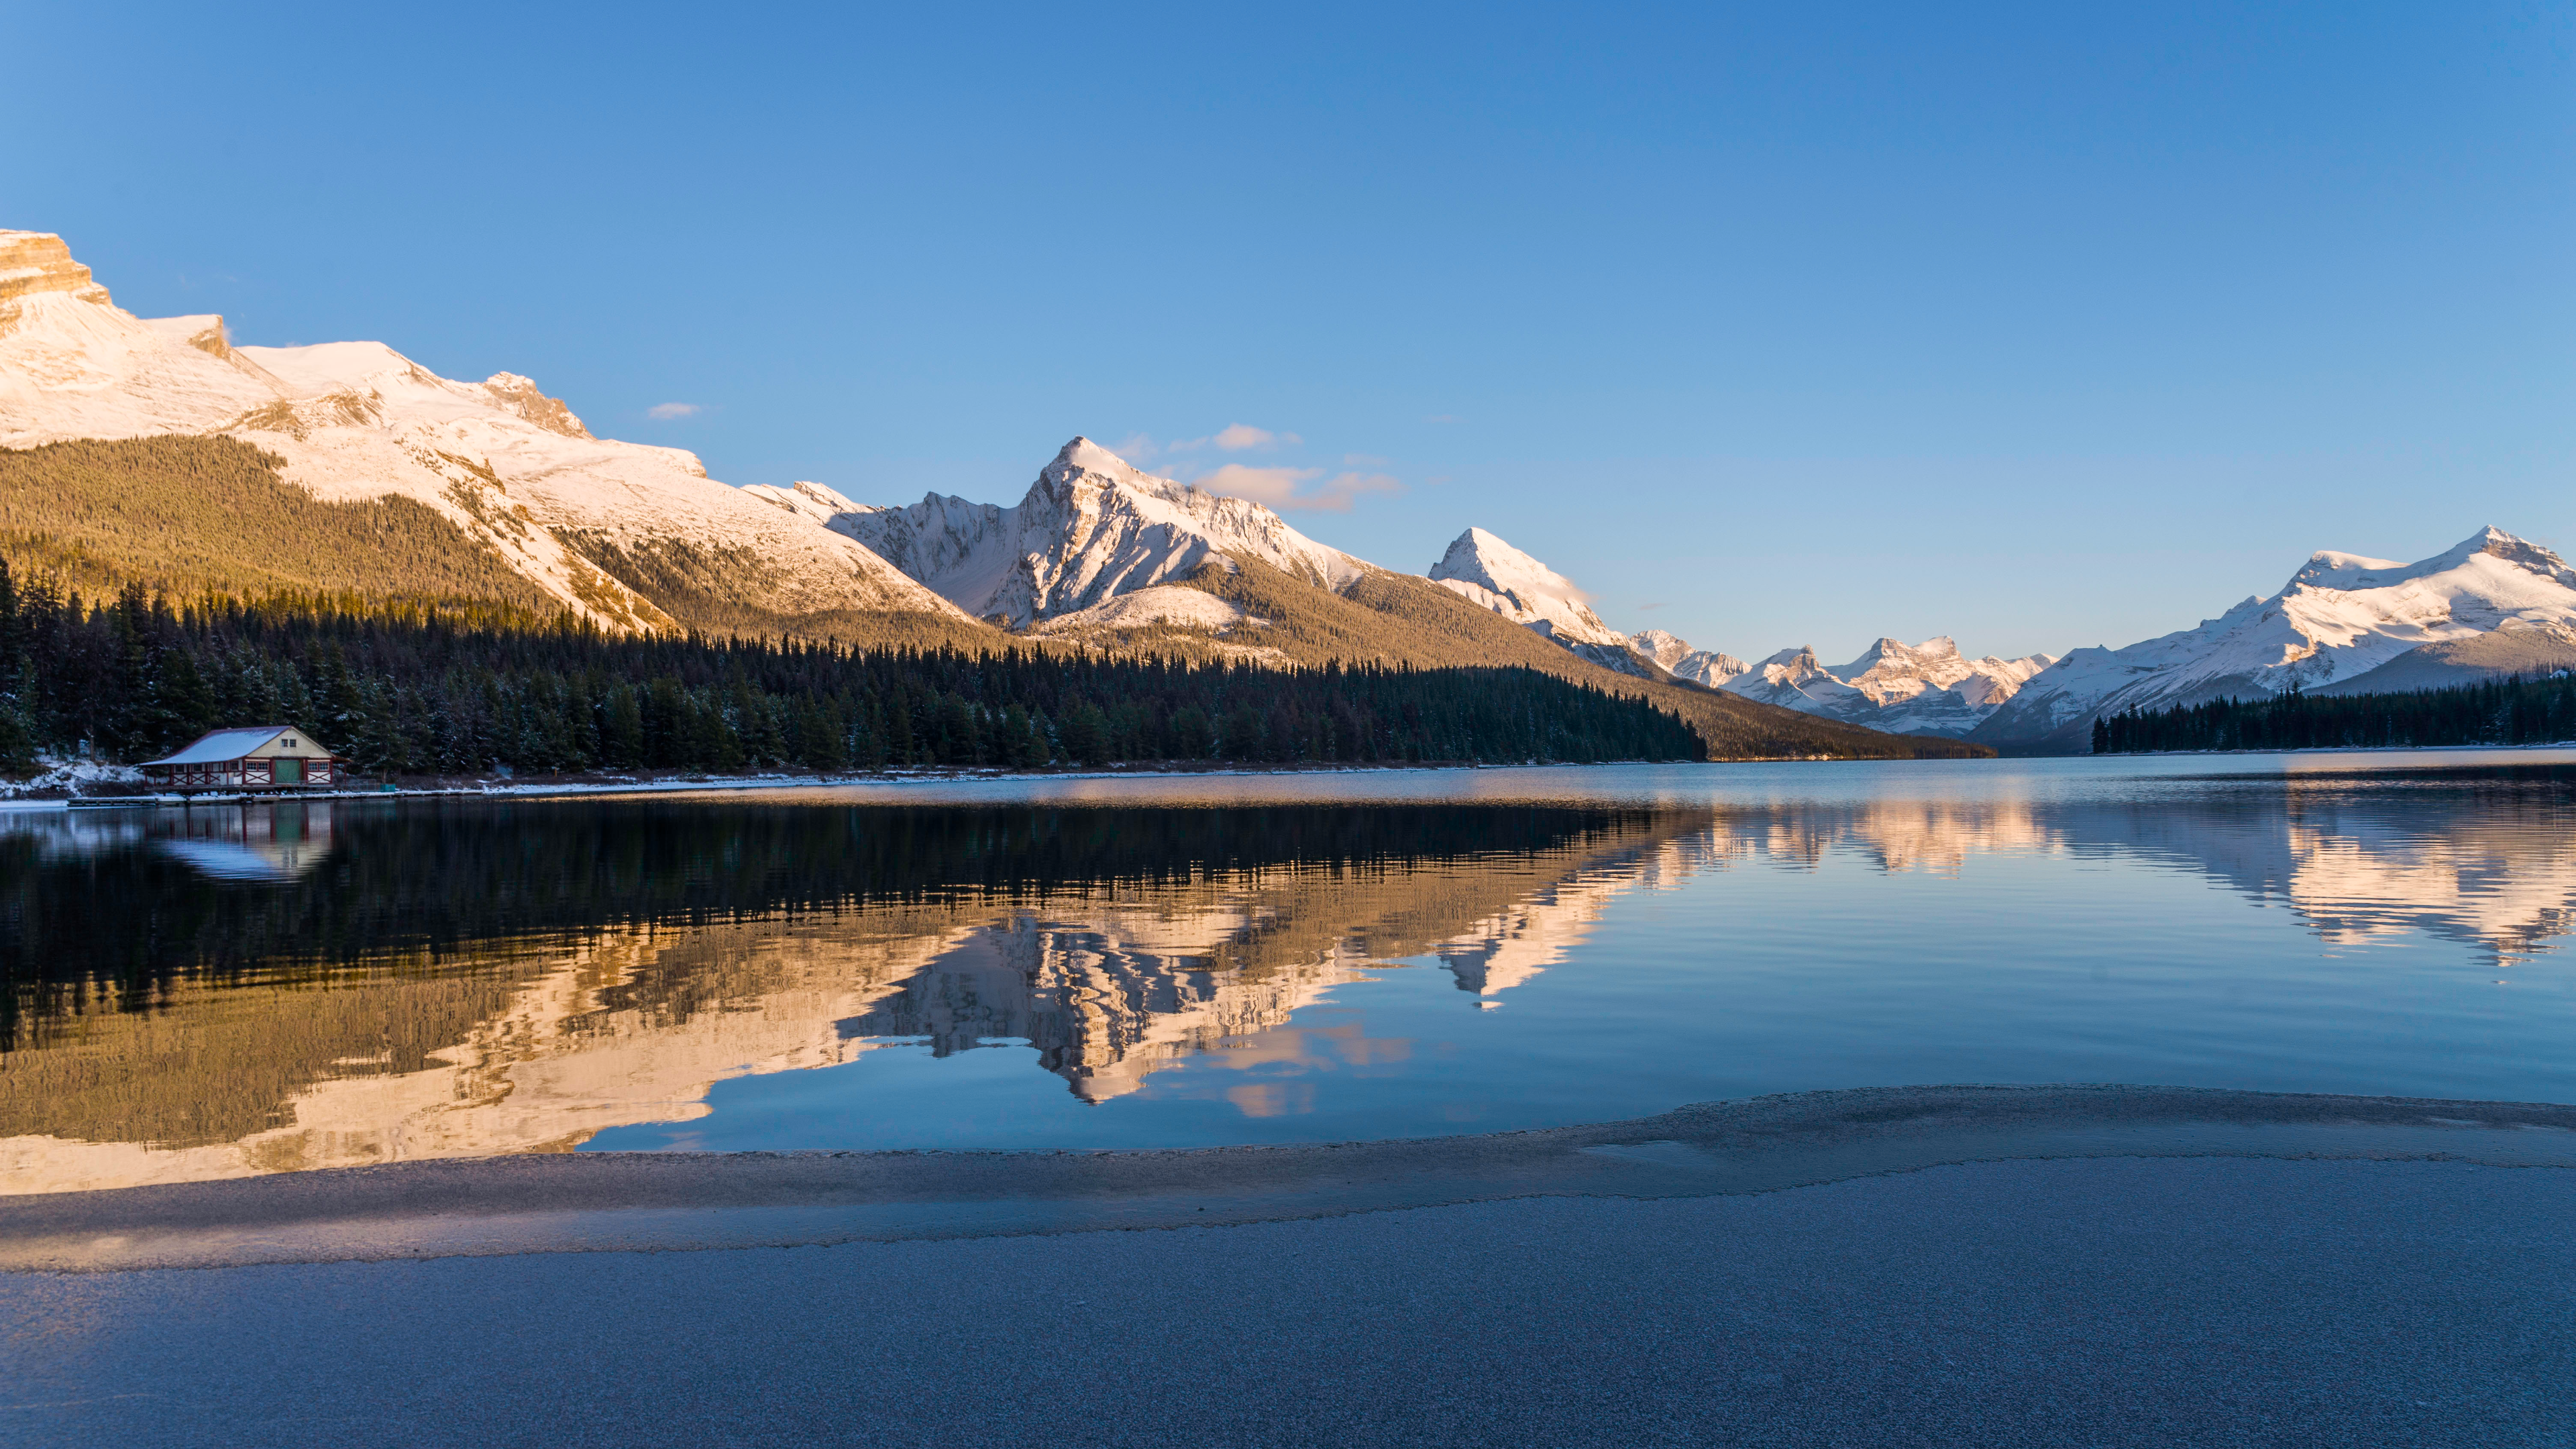 General 3840x2160 nature landscape water sand reflection mountains snow sky trees water ripples Jasper National Park Canada Txema house sunlight